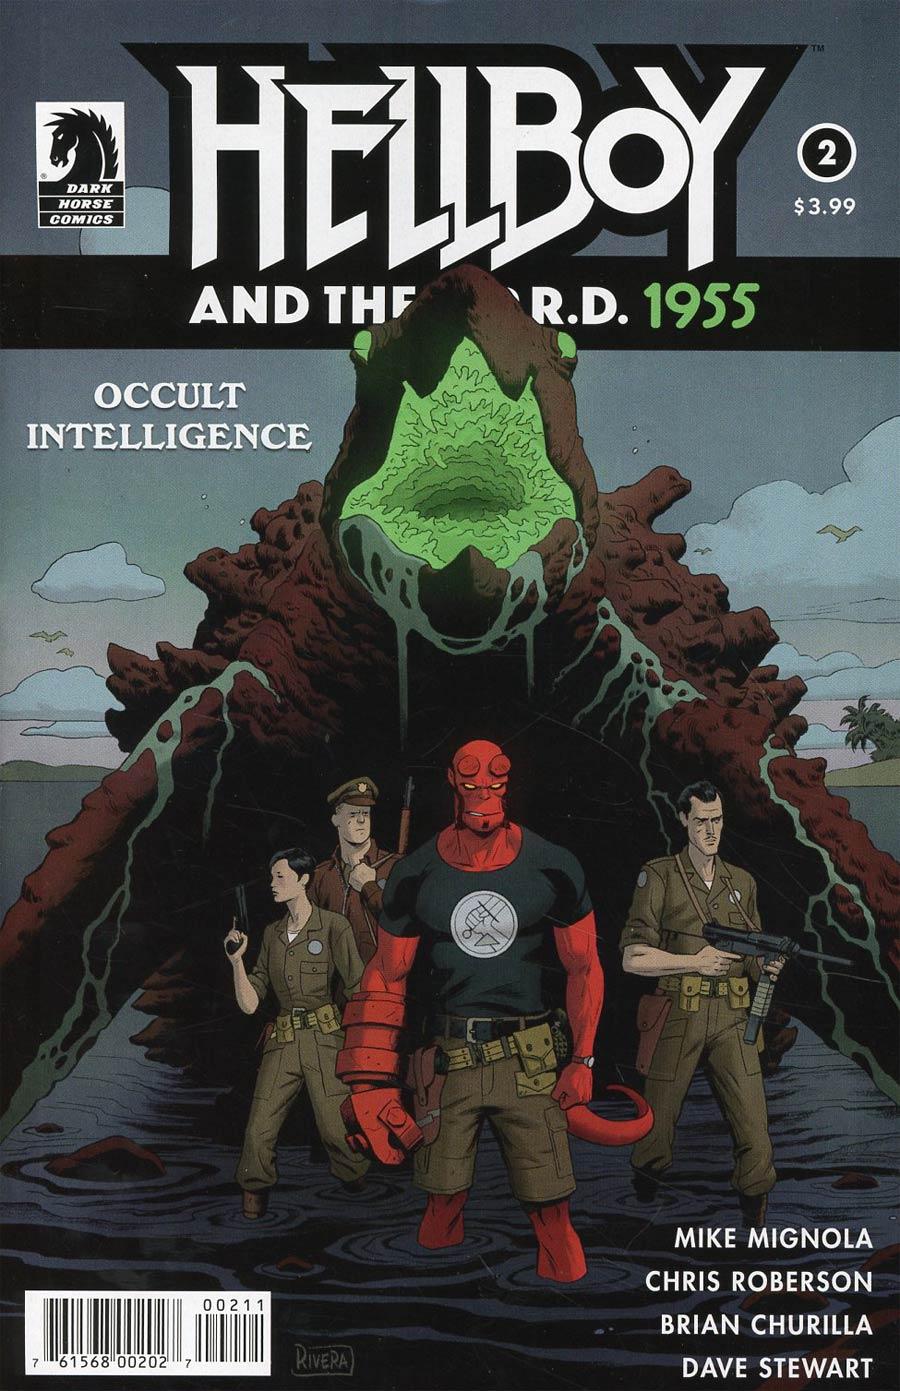 Hellboy And The BPRD 1955 Occult Intelligence Vol. 1 #2